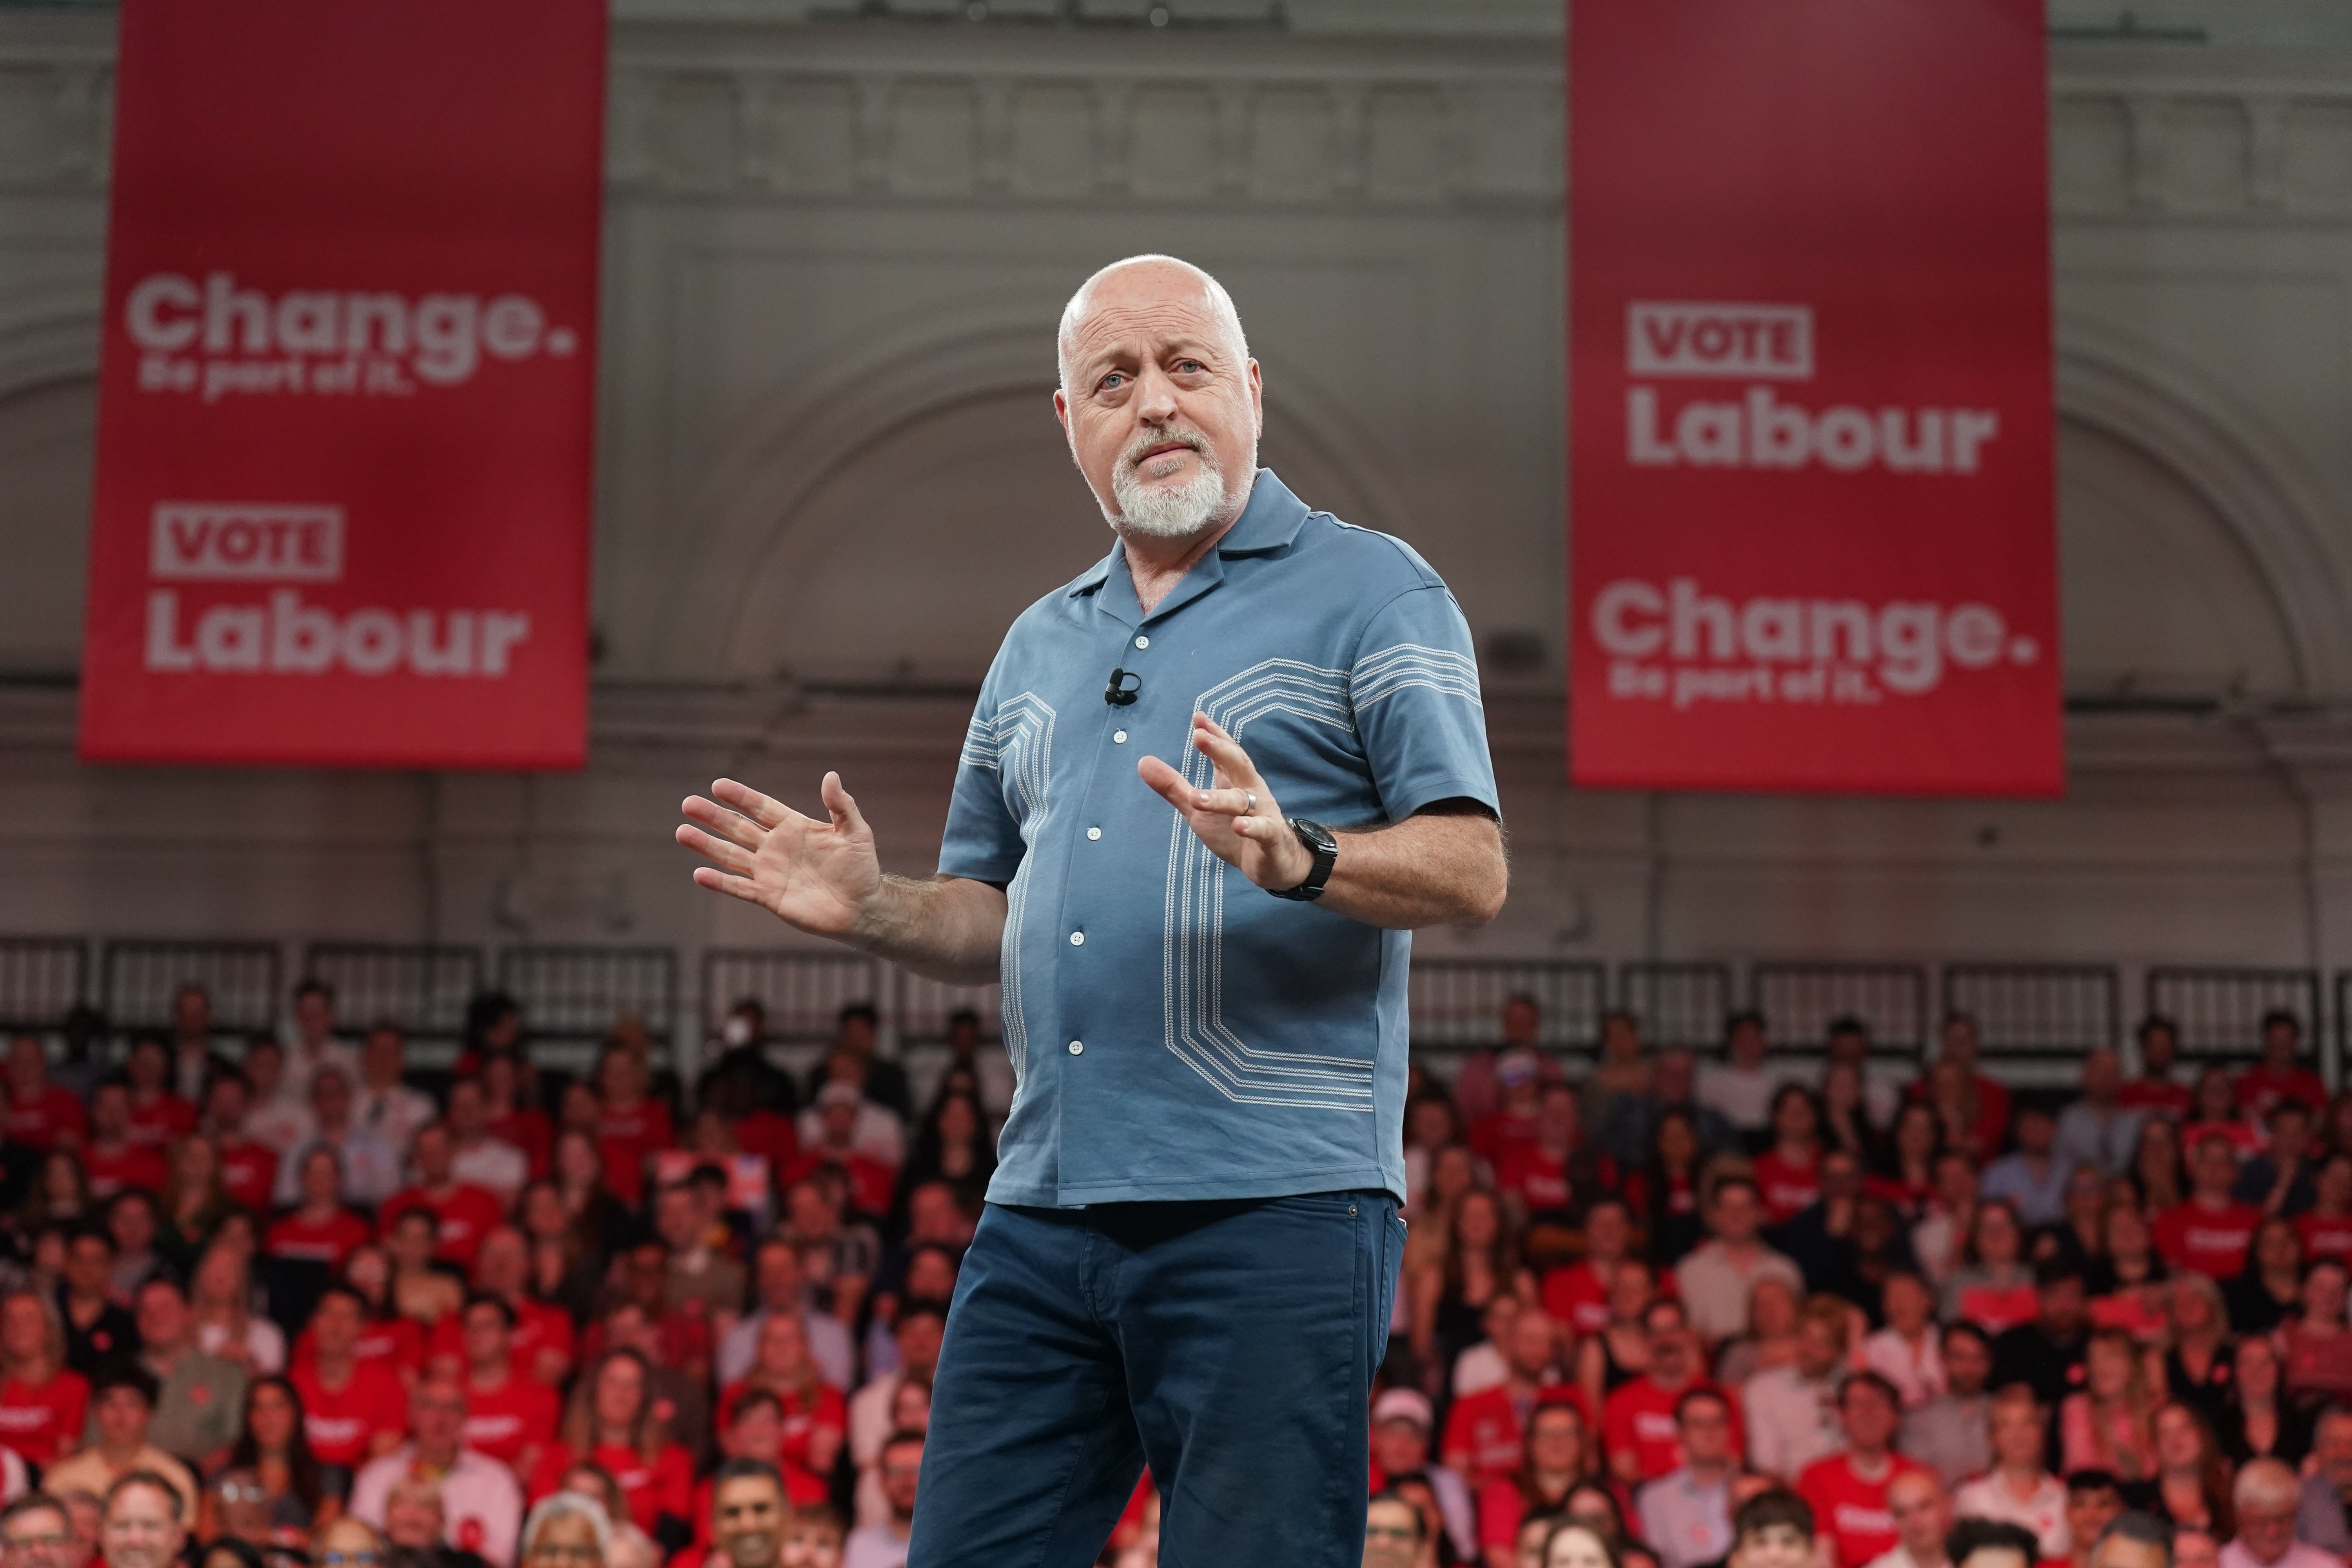 Musician and comedian Bill Bailey addressed the Labour rally, while there were video endorsements from several celebrities (Stefan Rousseau/PA)